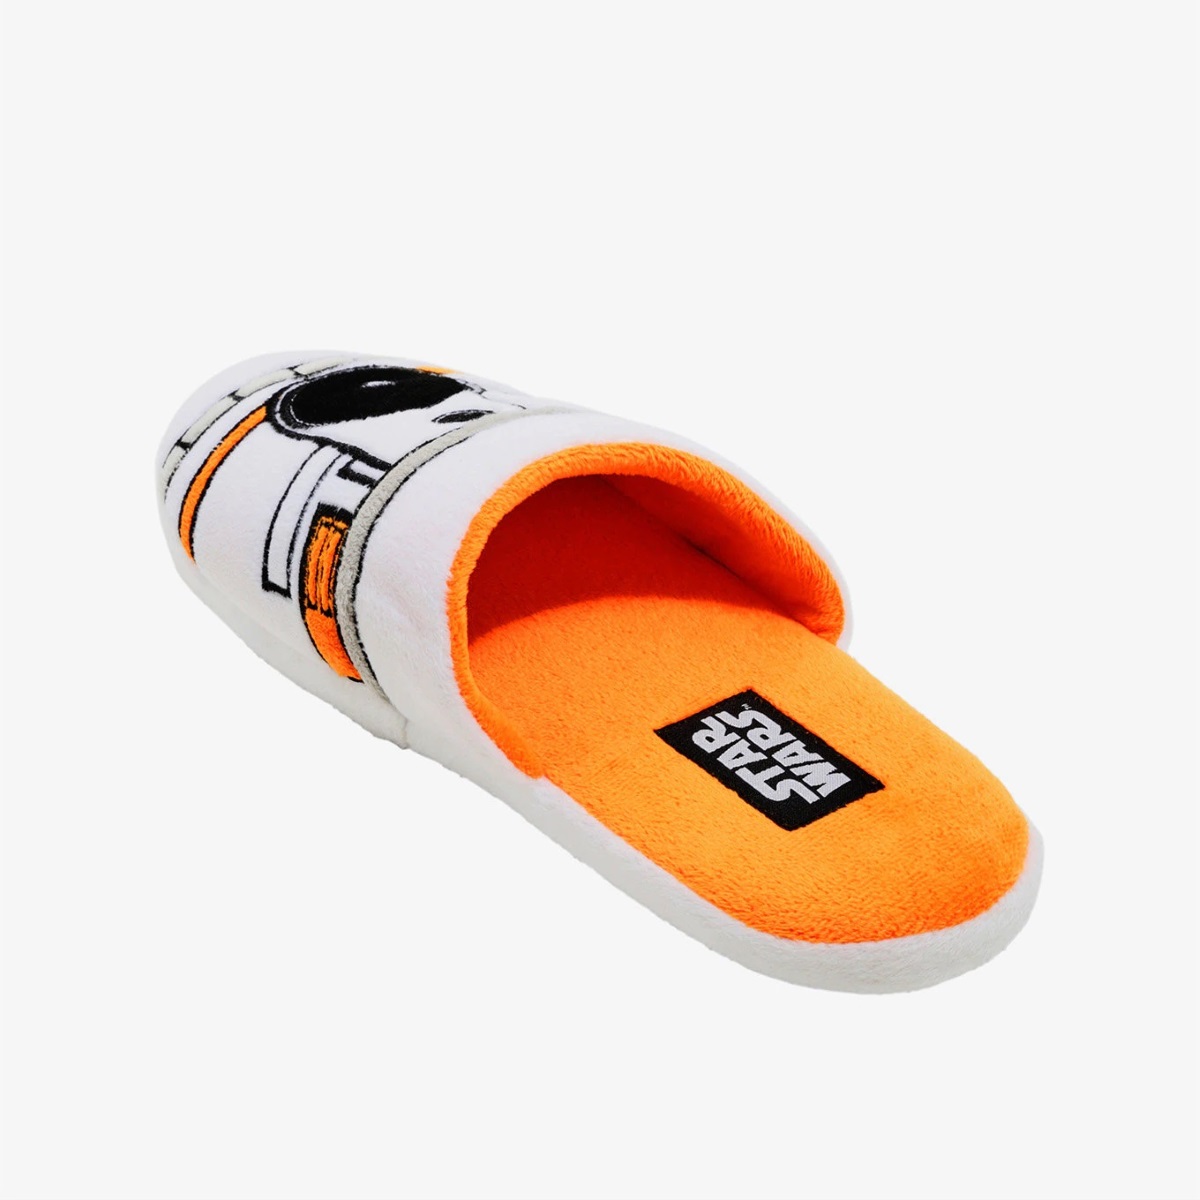 Star Wars BB-8 Slippers at Box Lunch